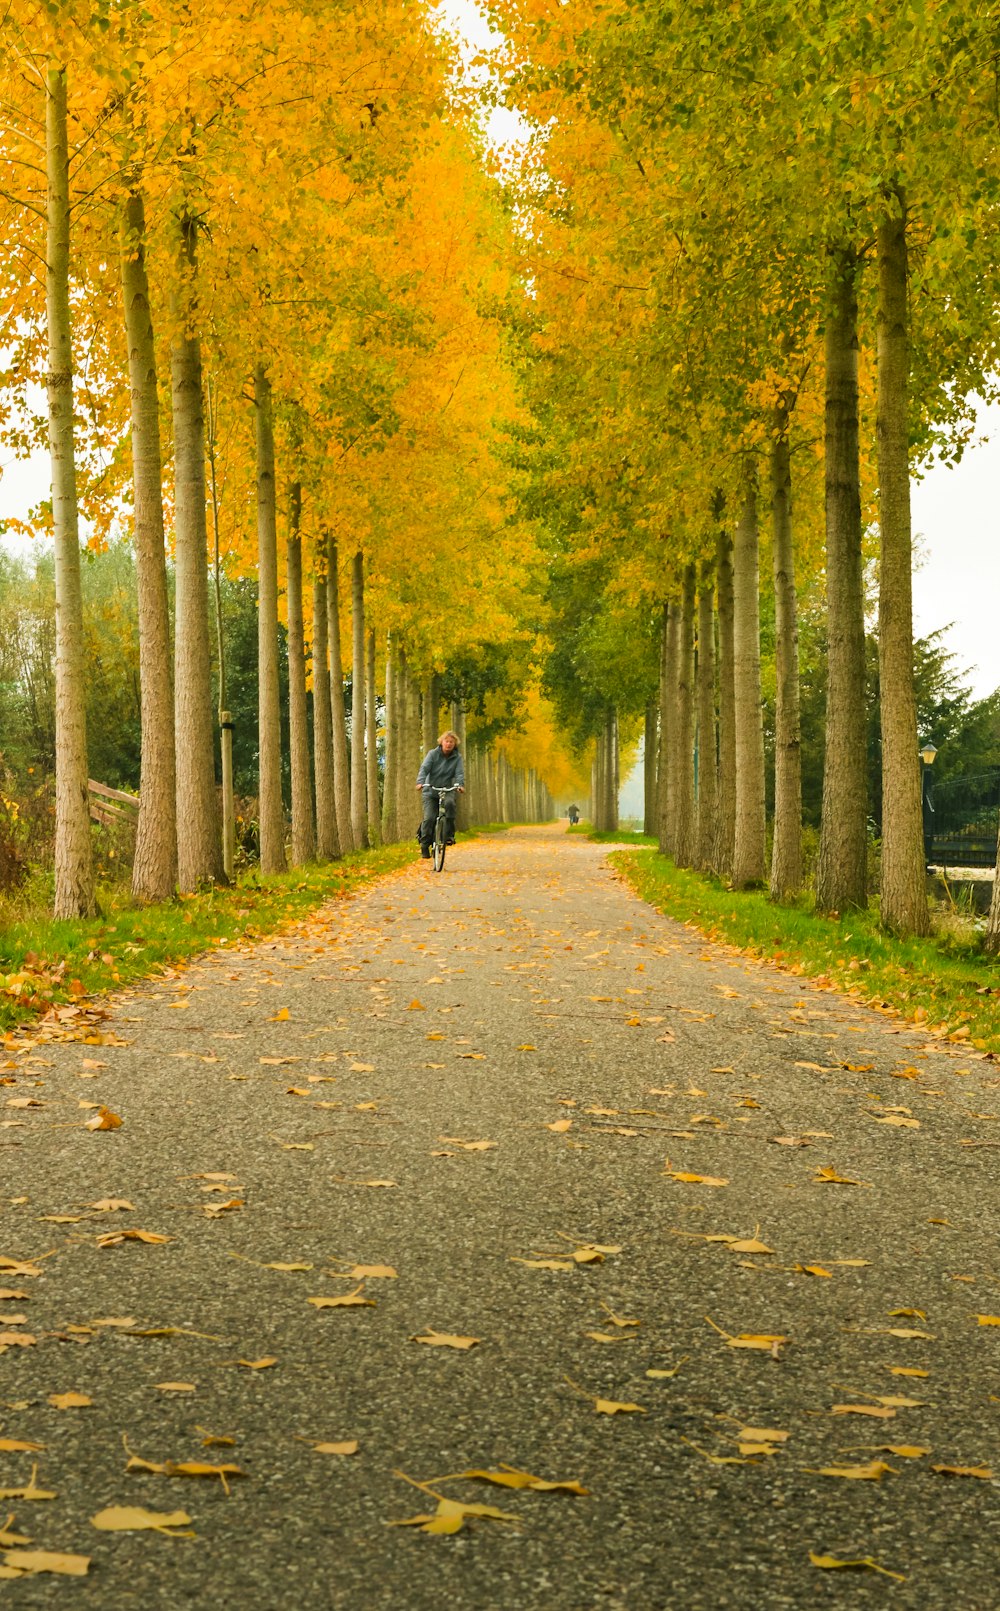 Street Trees Pictures | Download Free Images on Unsplash